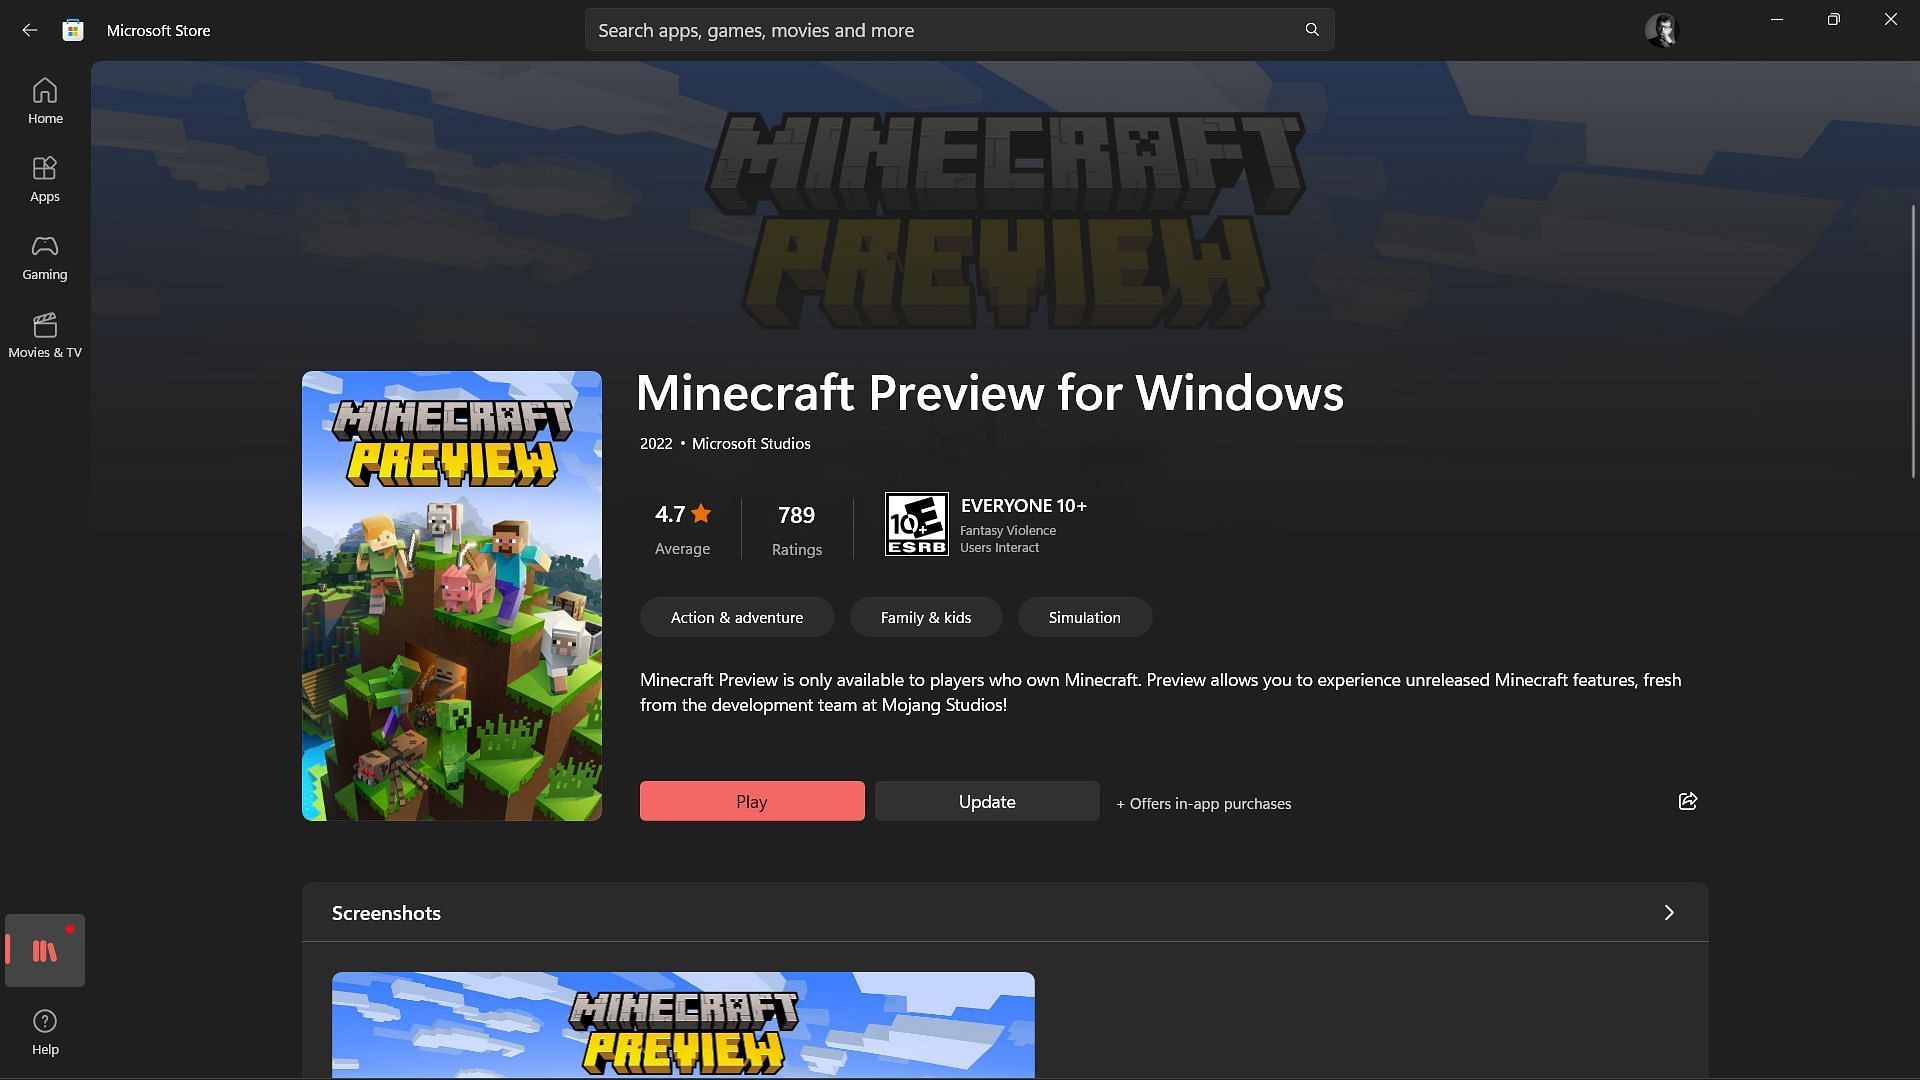 Beta and preview game versions can be found on Microsoft Store if a player already owns Bedrock Edition (Image via Sportskeeda)